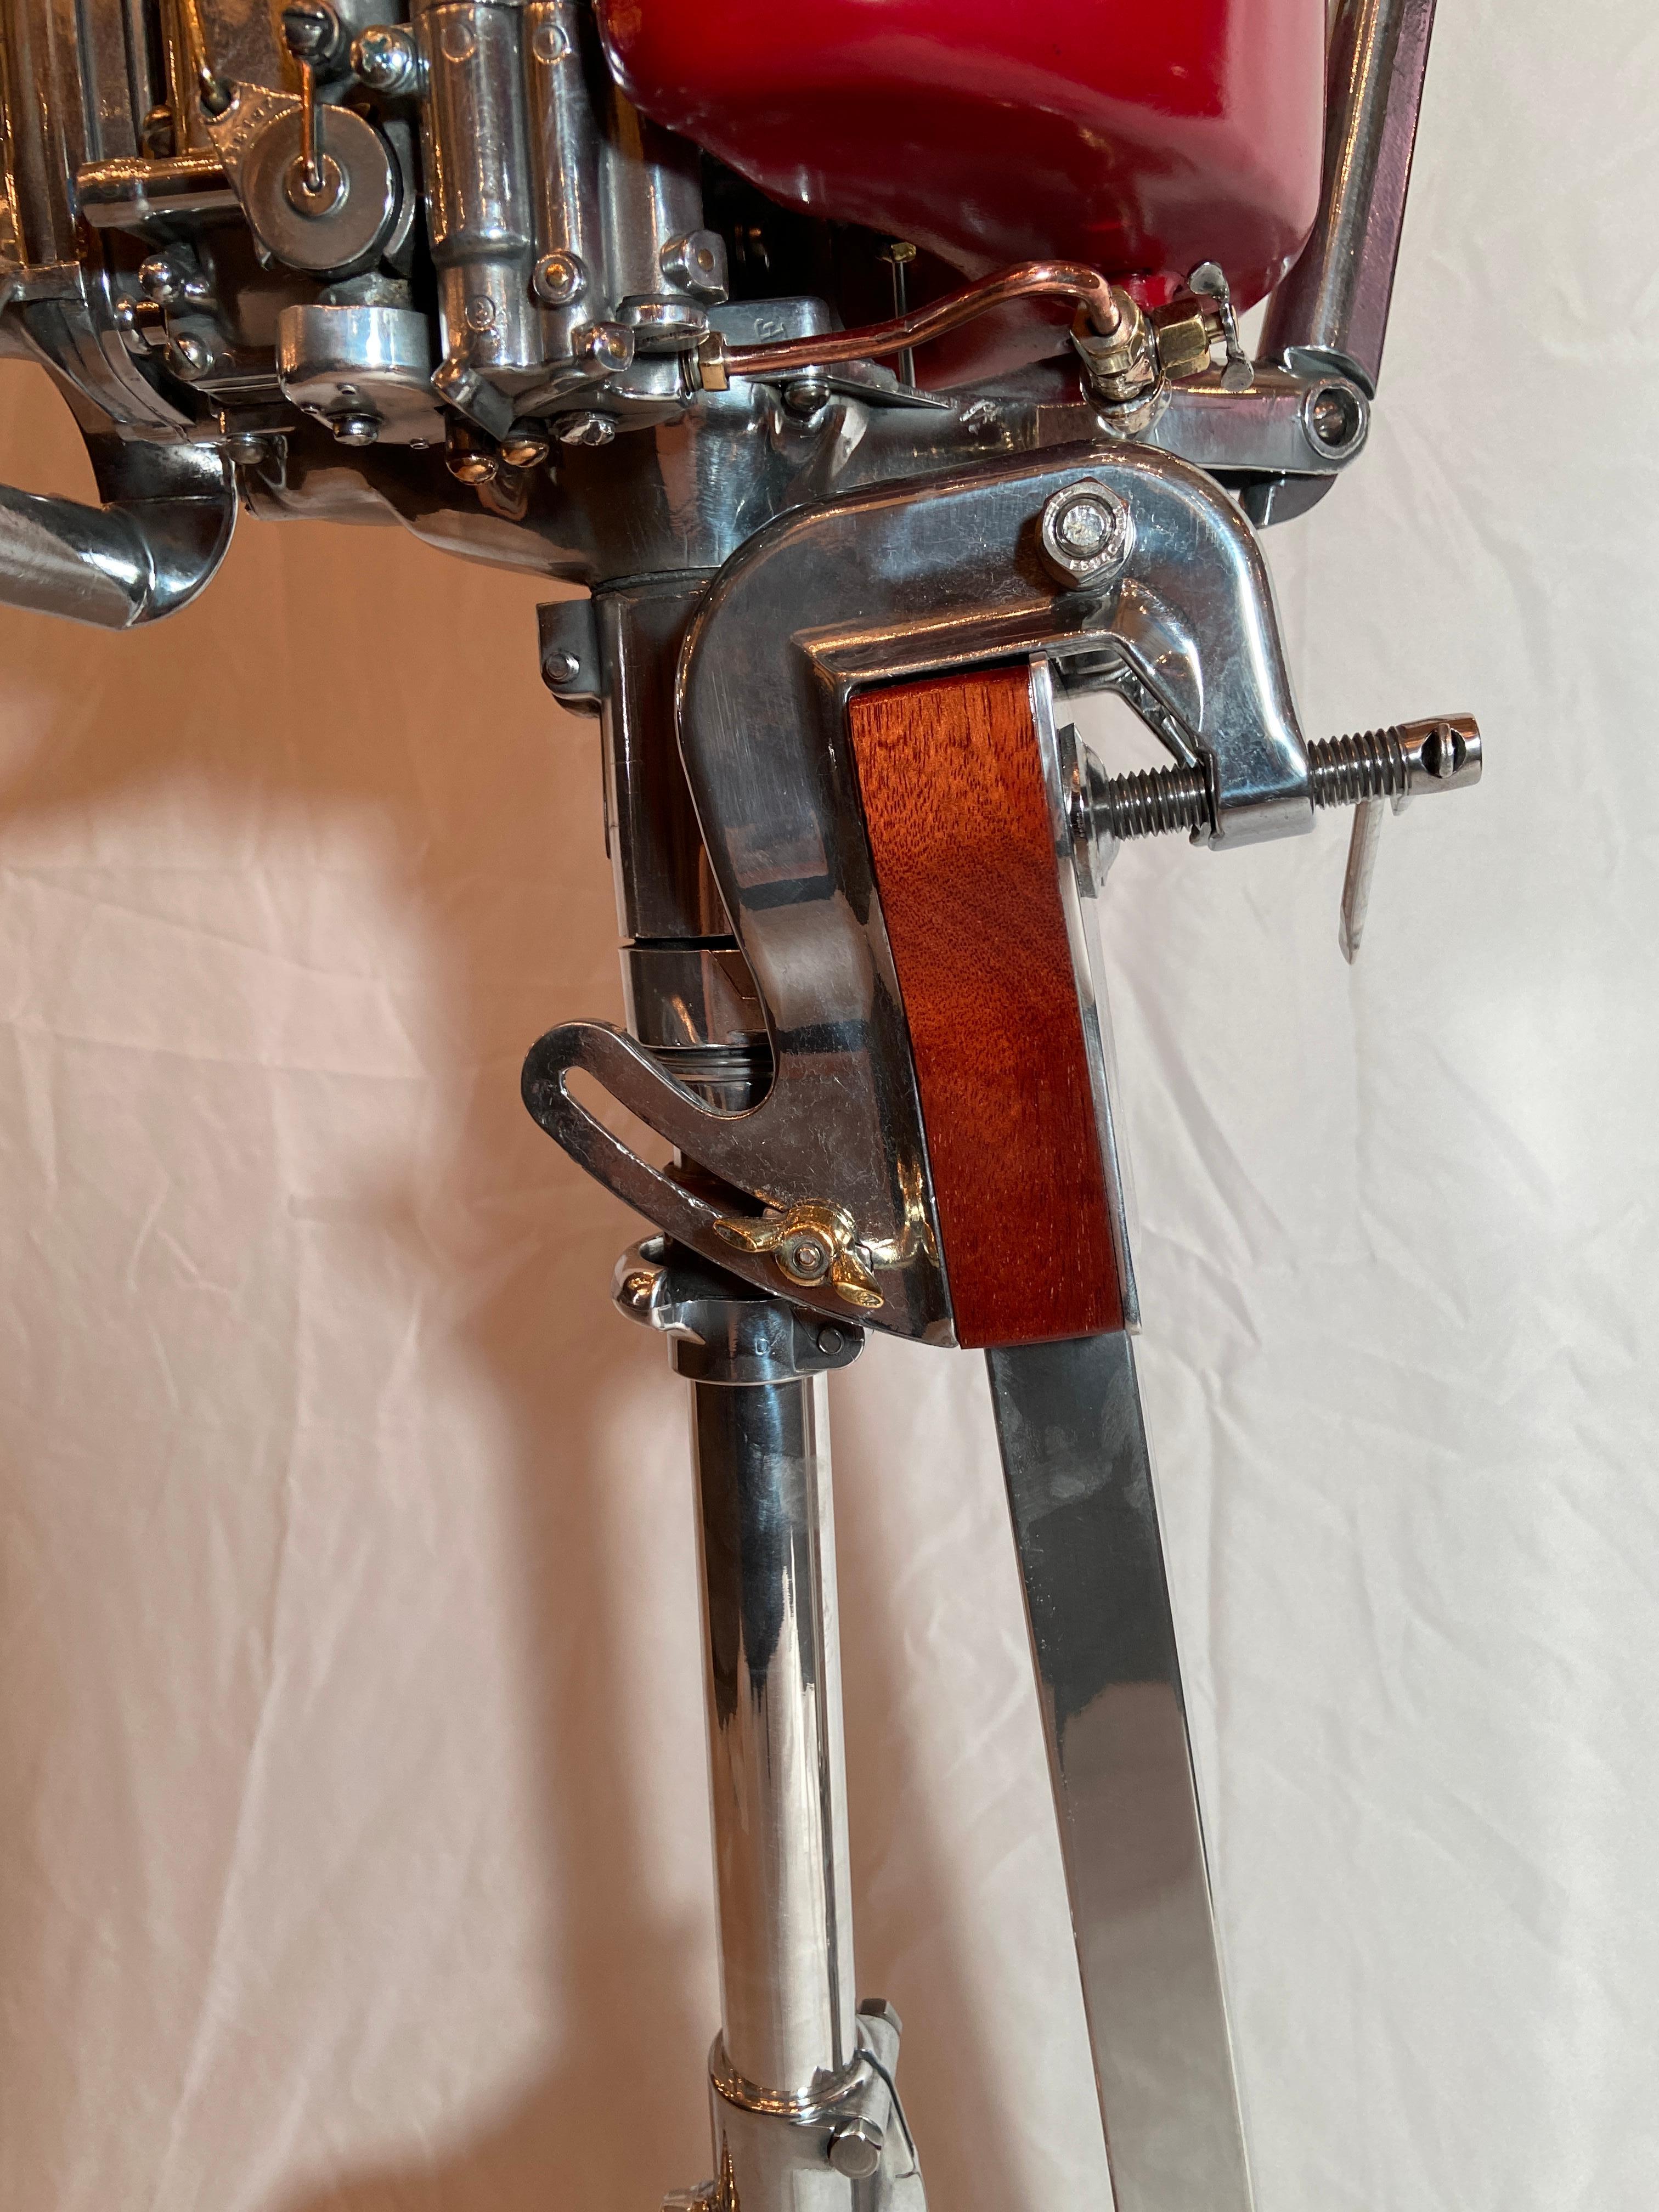 20th Century Estate American Johnson Sea-Horse Outboard Motor on Custom-Made Stand Ca. 1940's